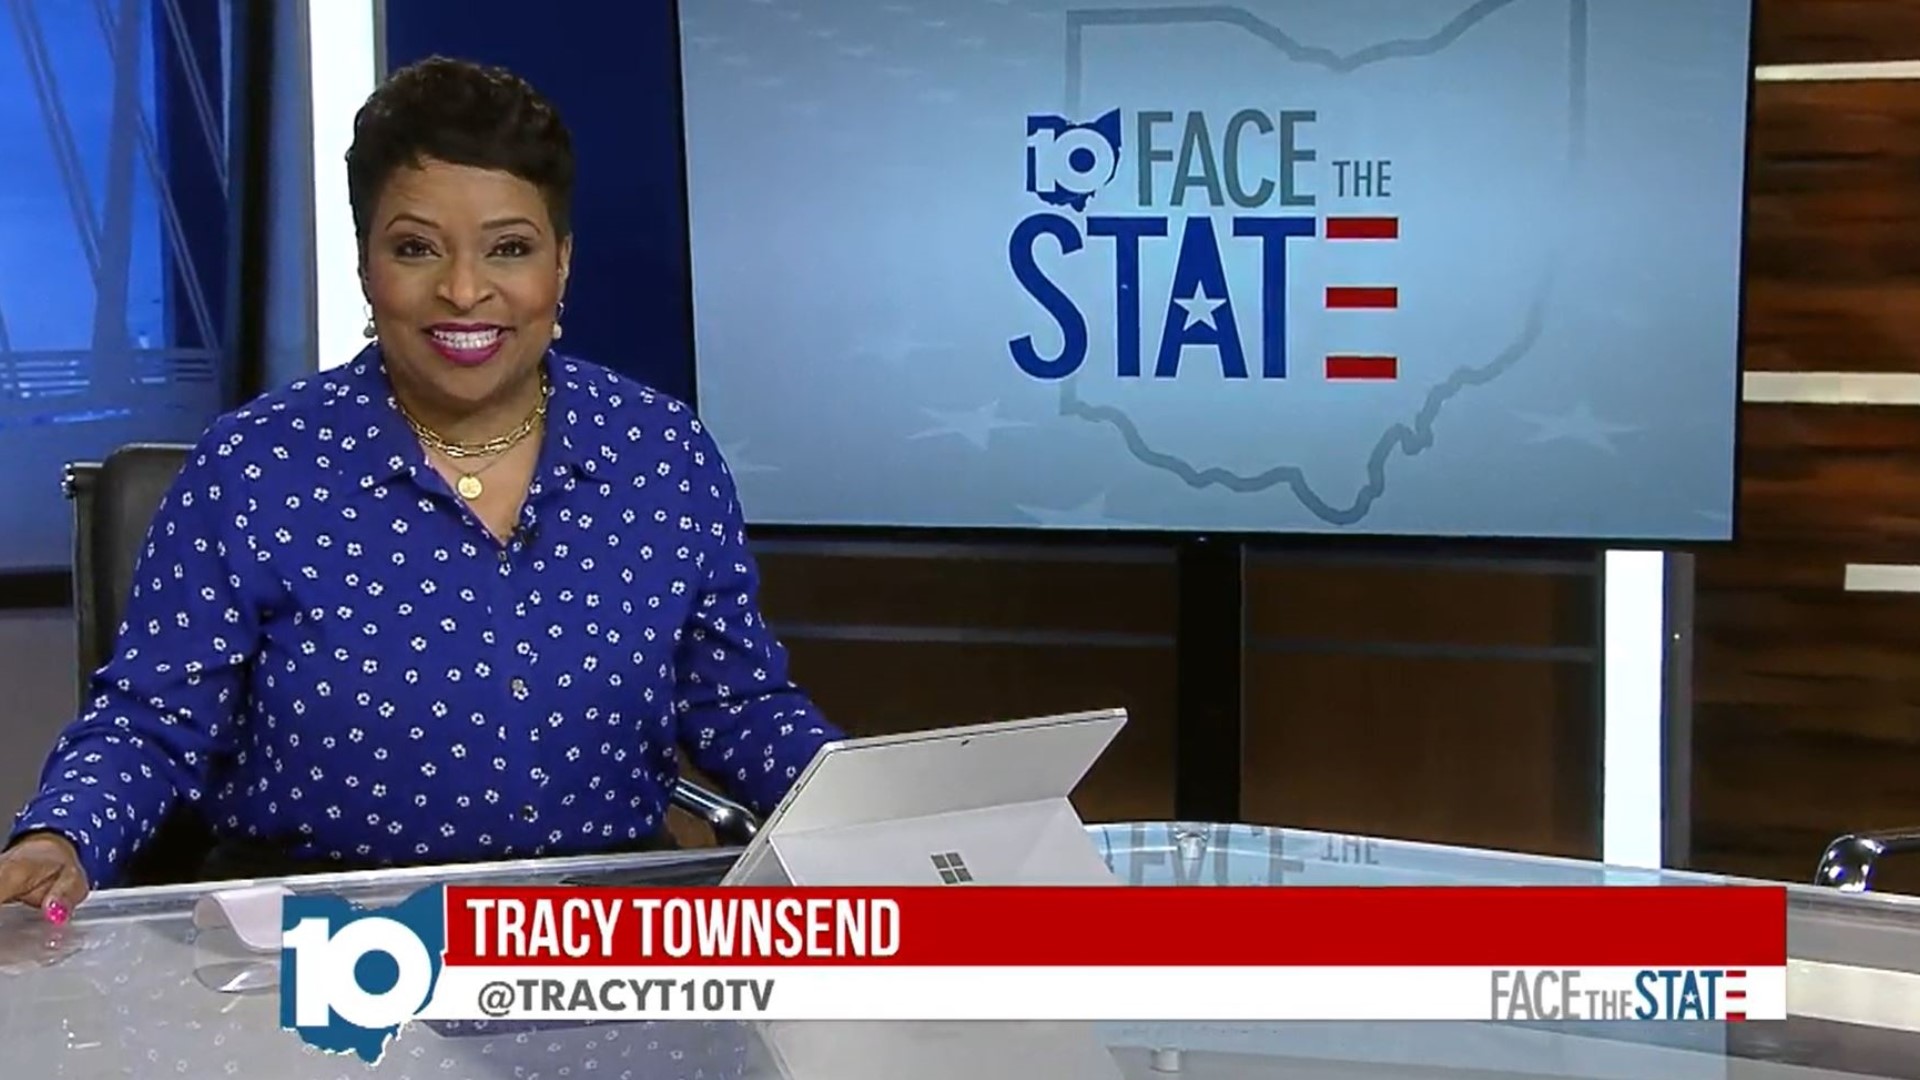 This week's Face the State will look at early voting, House Bill 6161 and Ketanji Brown Jackson being confirmed as a justice for the U.S. Supreme Court.